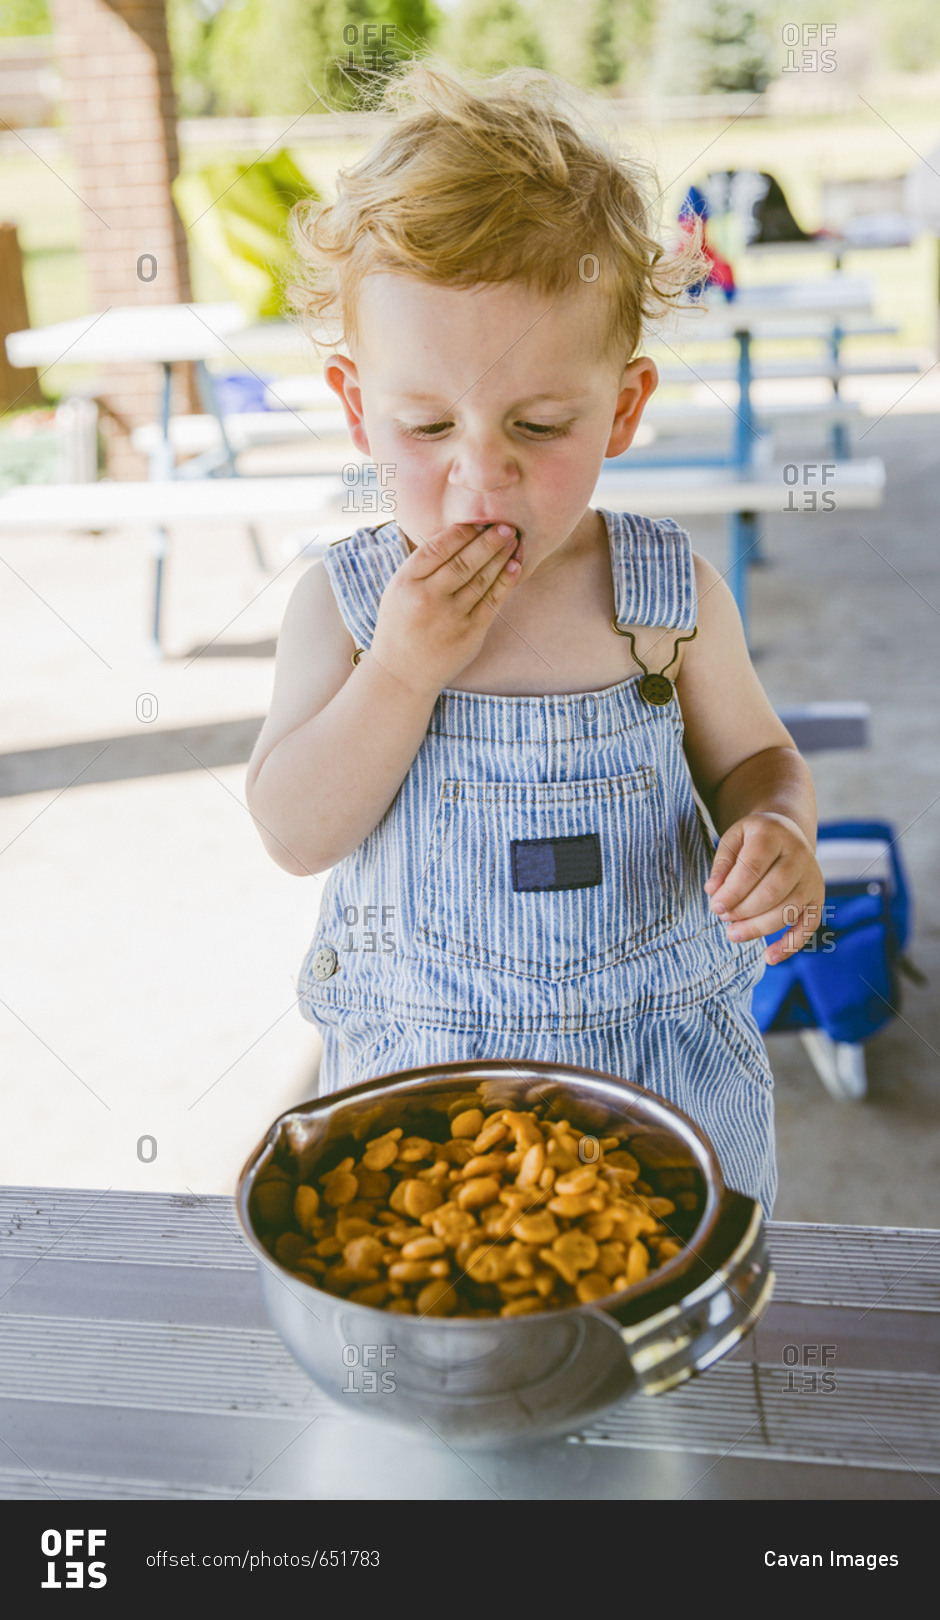 Cute boy wearing bib overalls while eating crackers from bowl